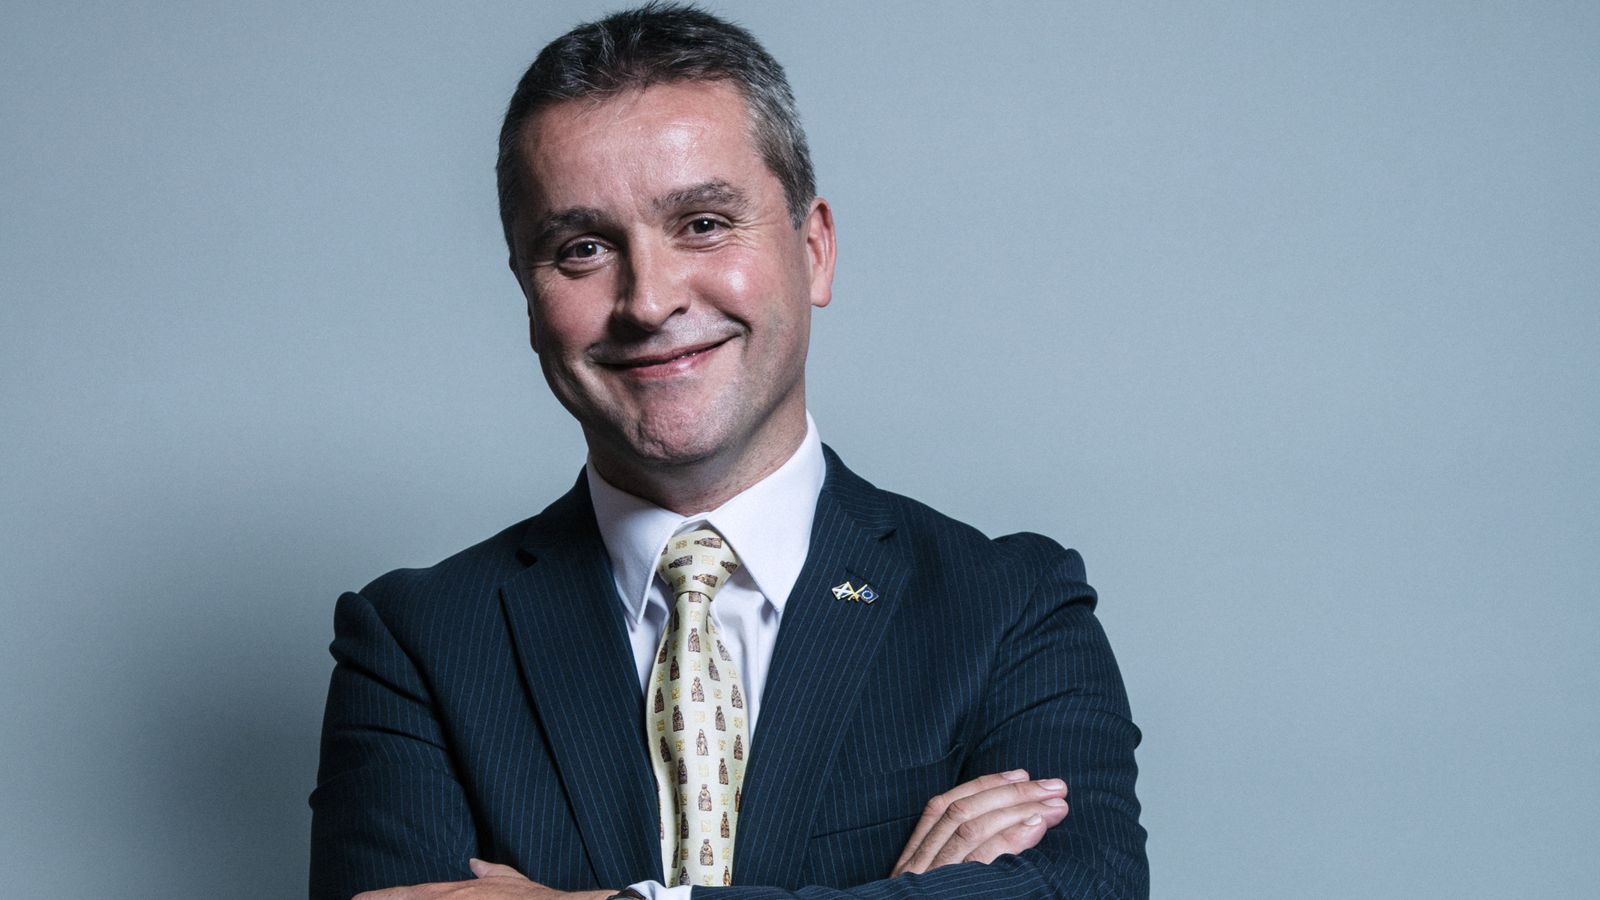 MP Angus MacNeil will not rejoin SNP Westminster group after suspension as he attacks lack of 'urgency for independence'